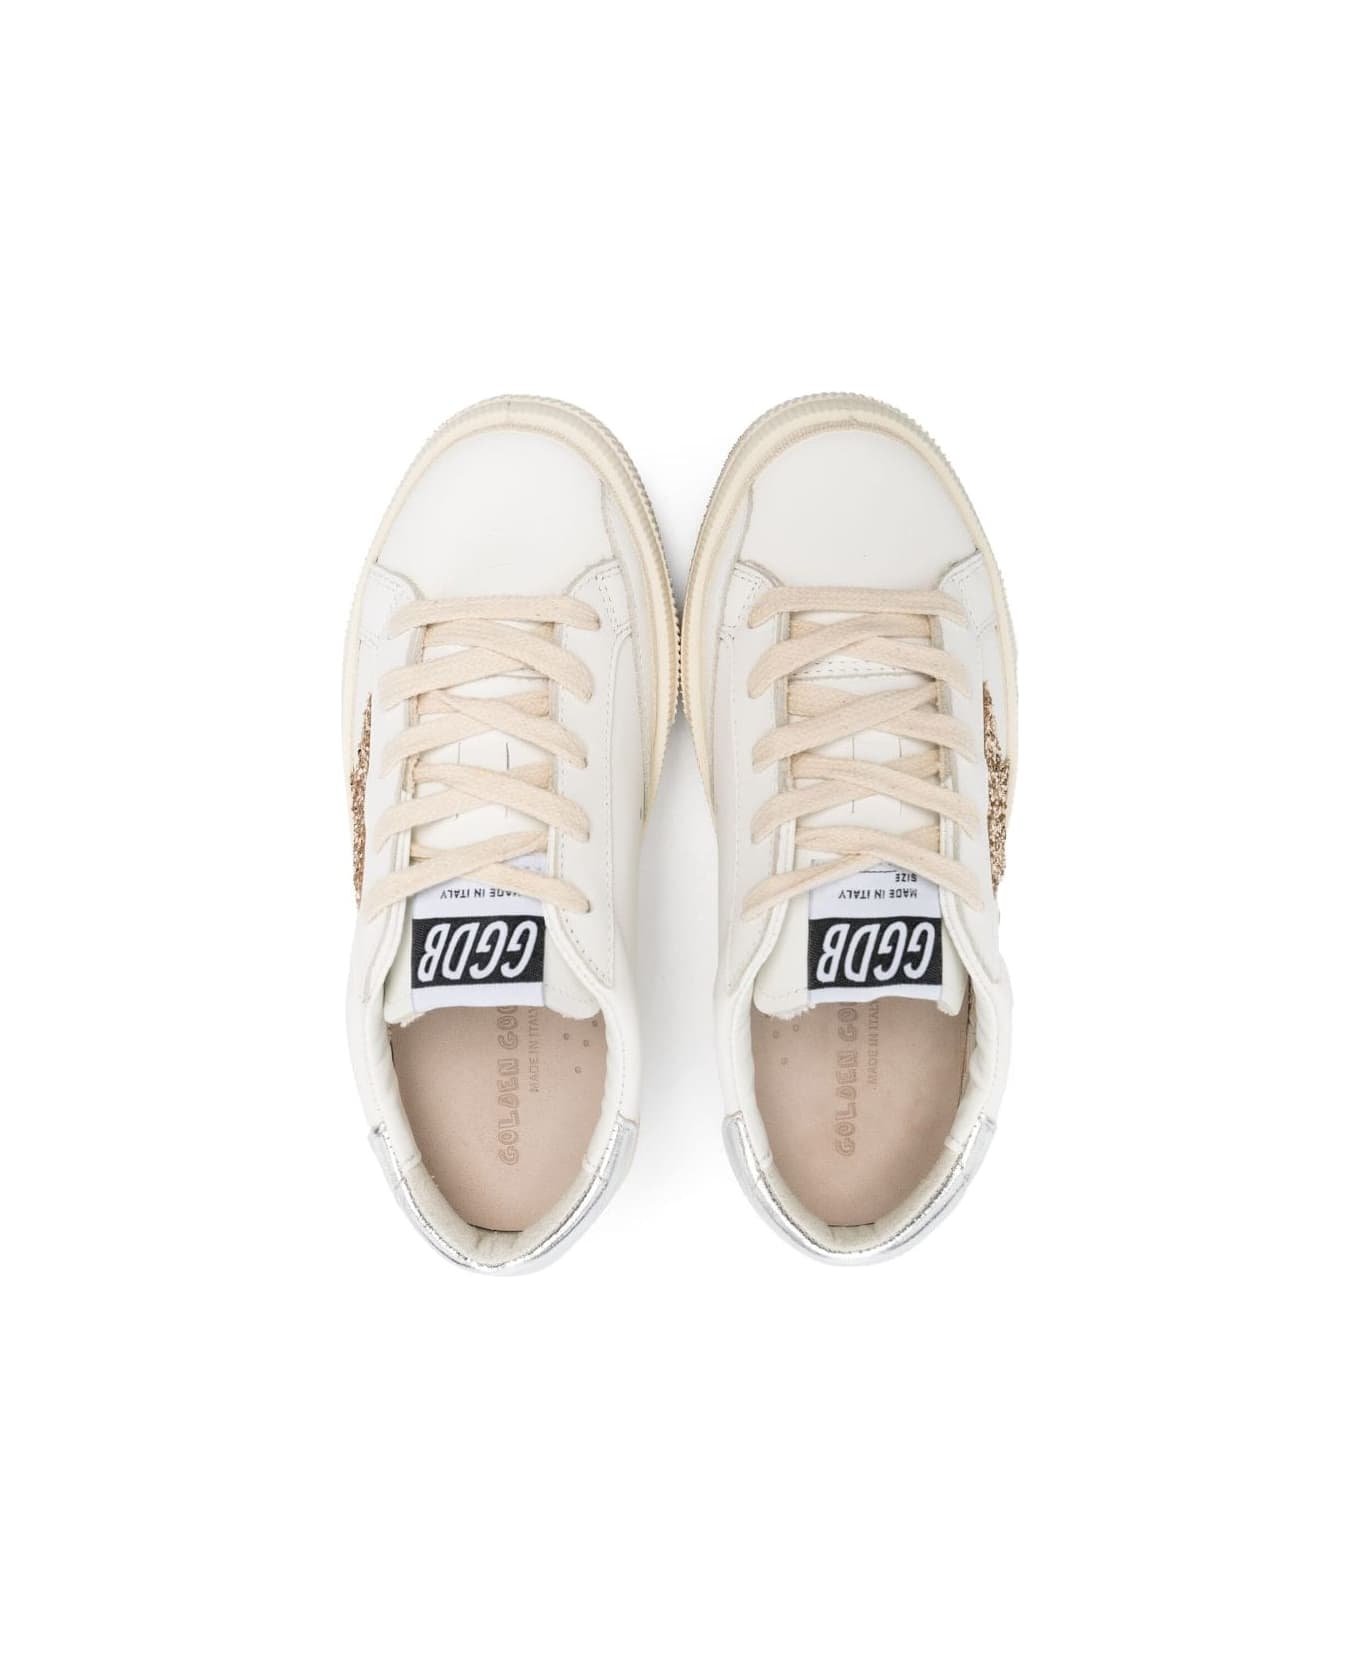 Golden Goose Sneakers Bianche In Pelle Con Lacci Bambina - Bianco